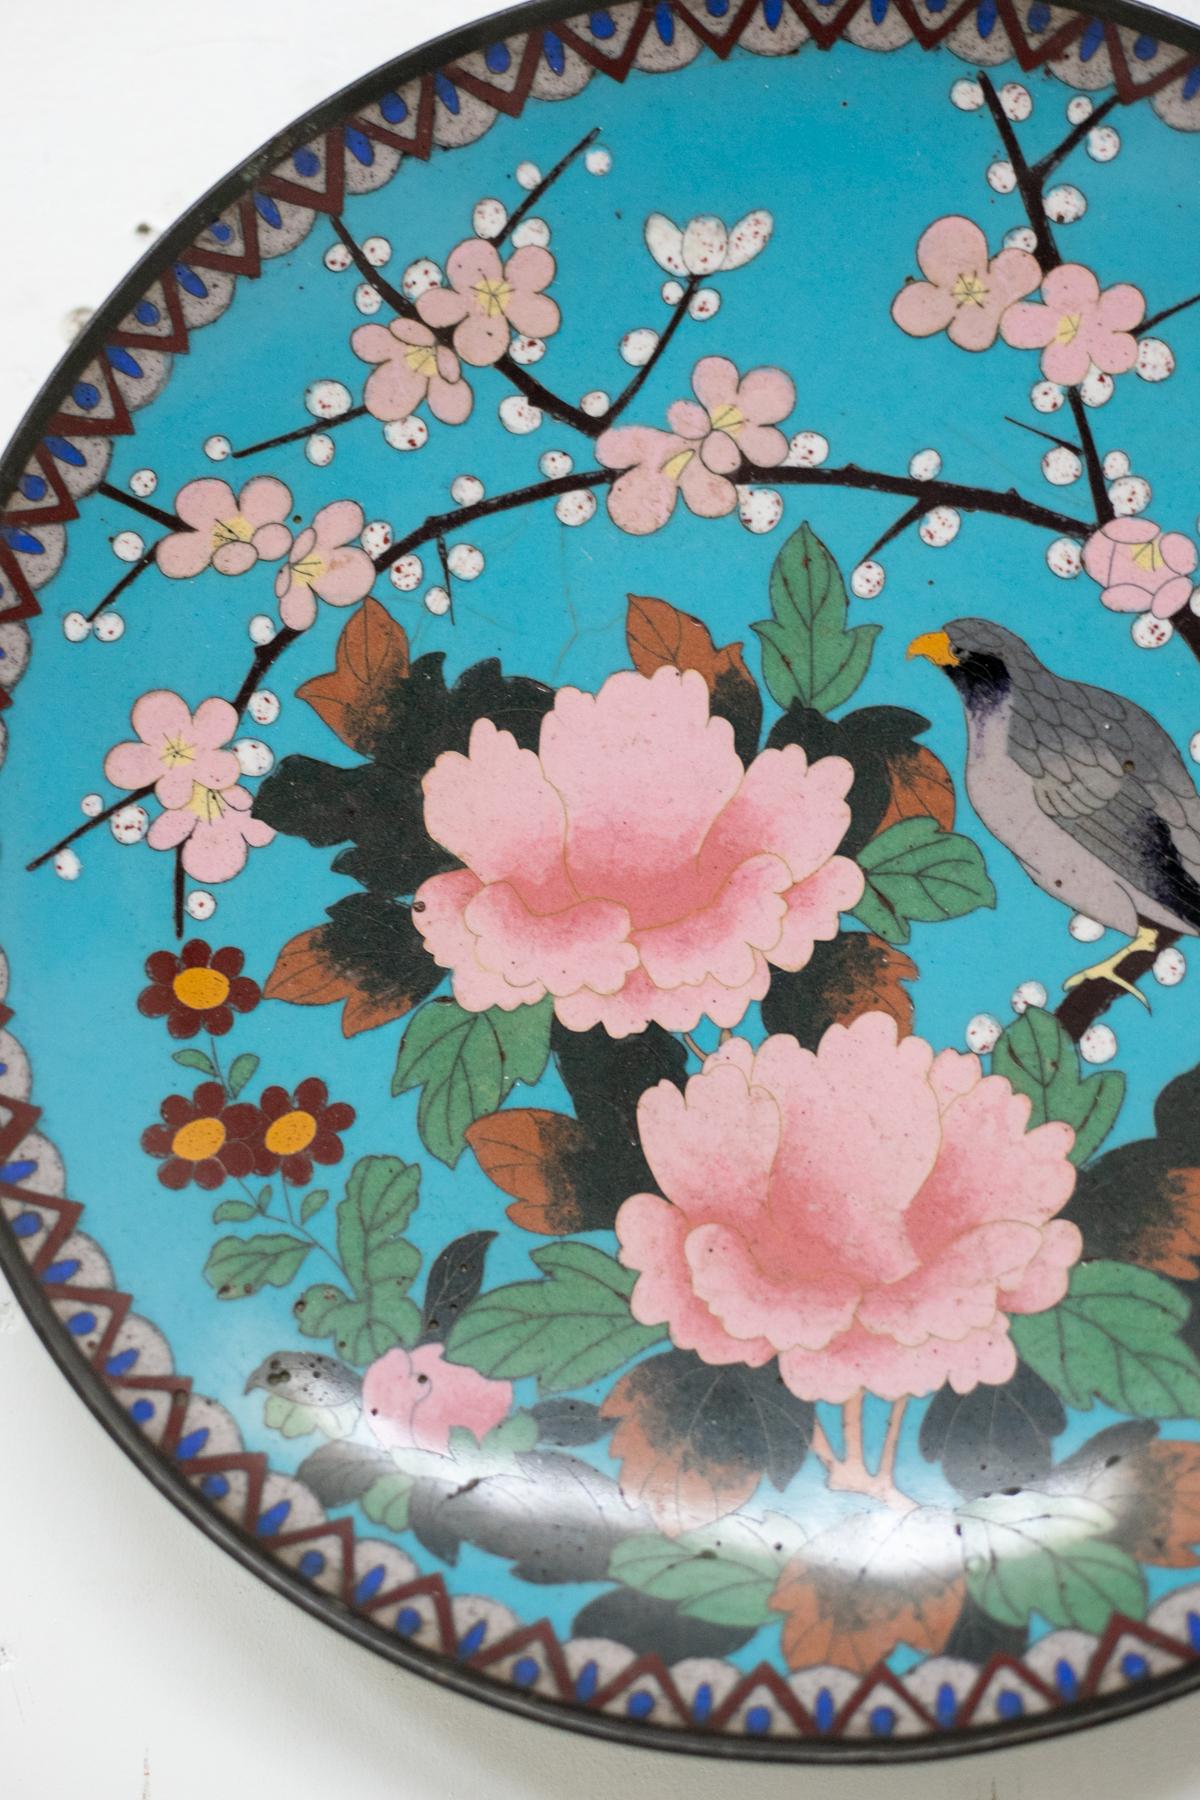 Round plate in bronze and cloisonné enamel designed in China in the 20th century.
This plate is made of bronze and cloisonné enamel, a goldsmithing technique originally applied to jewellery design. The polychrome decorations depict a sparrow